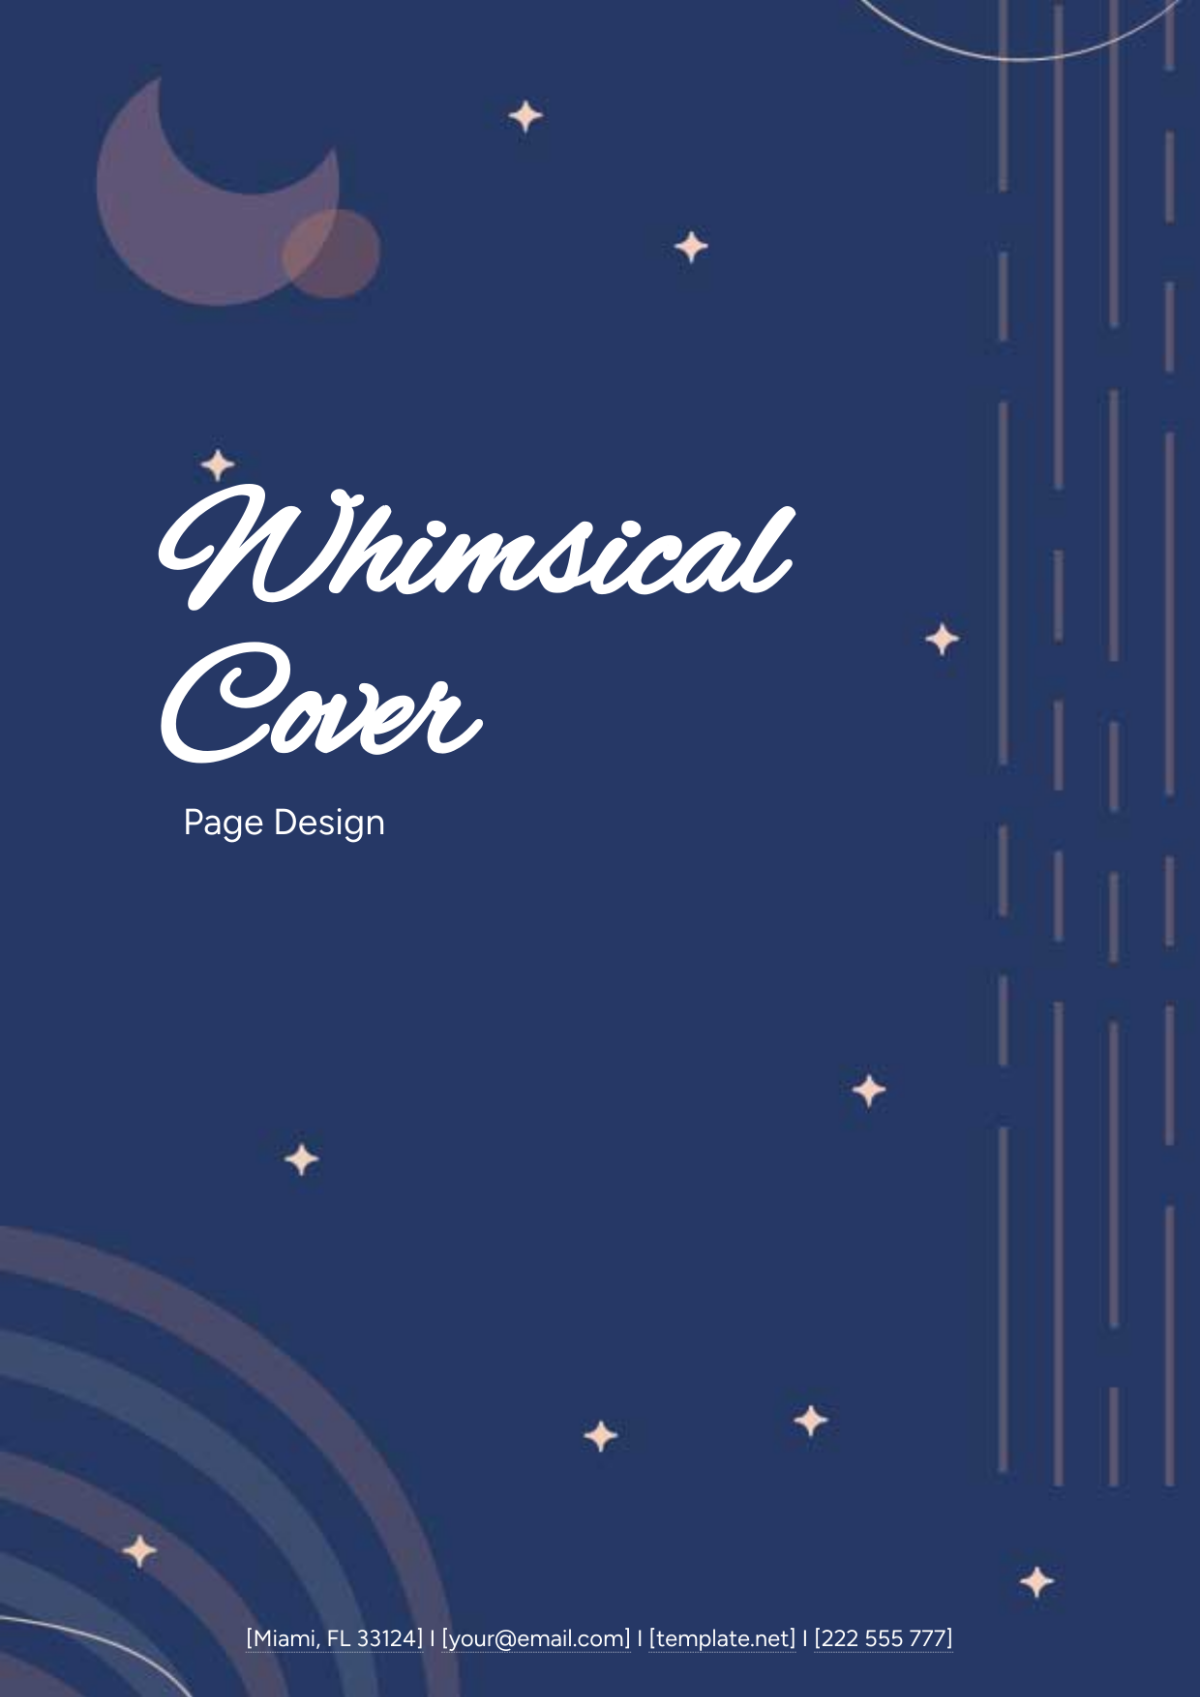 Whimsical Cover Page Design